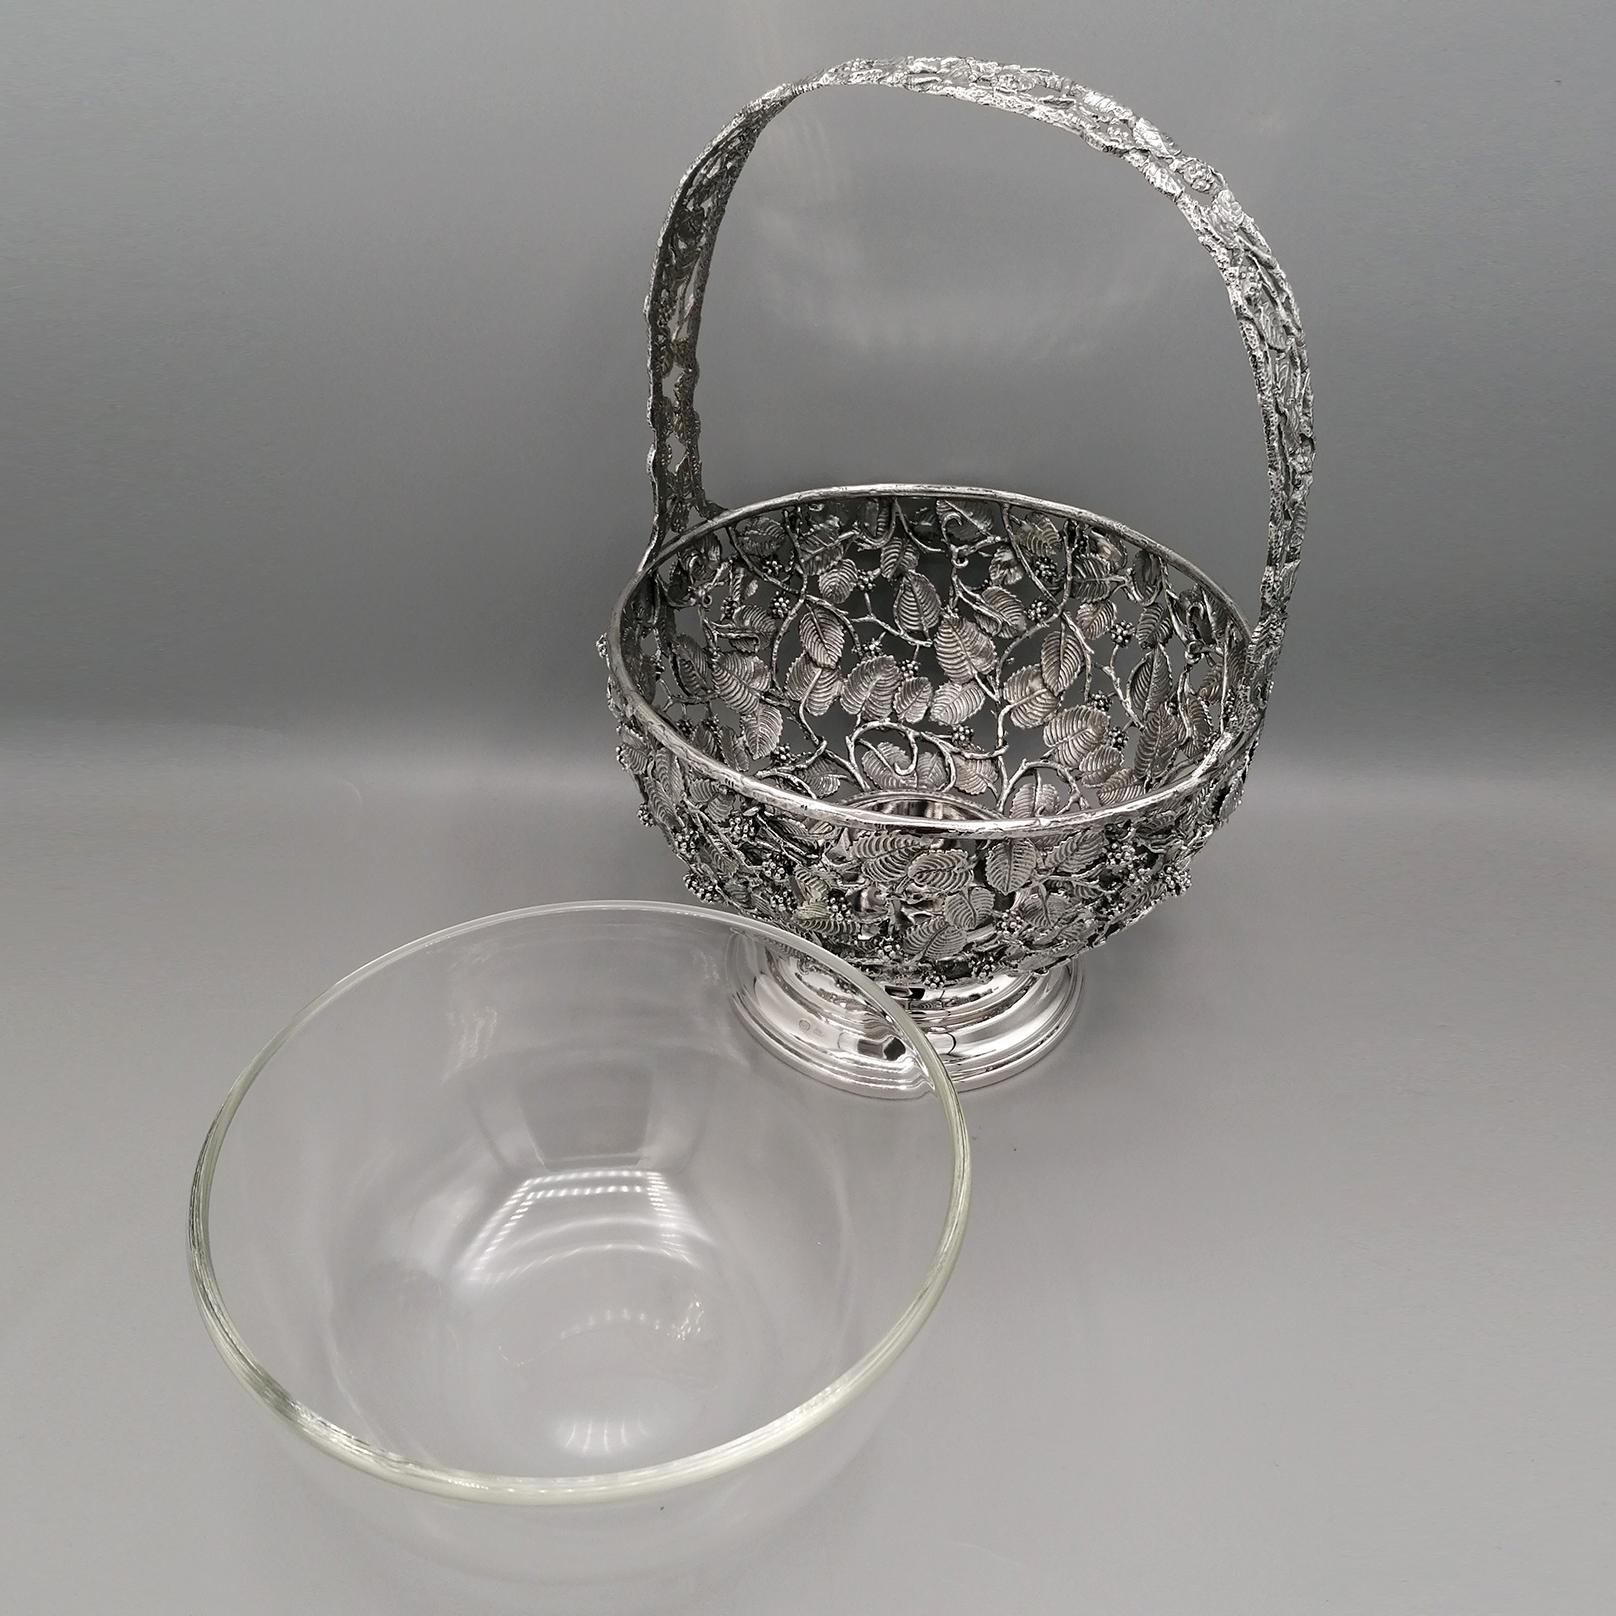 20th Century Italian Basket  sterling silver pierced with blackberries and leaves.  For Sale 6